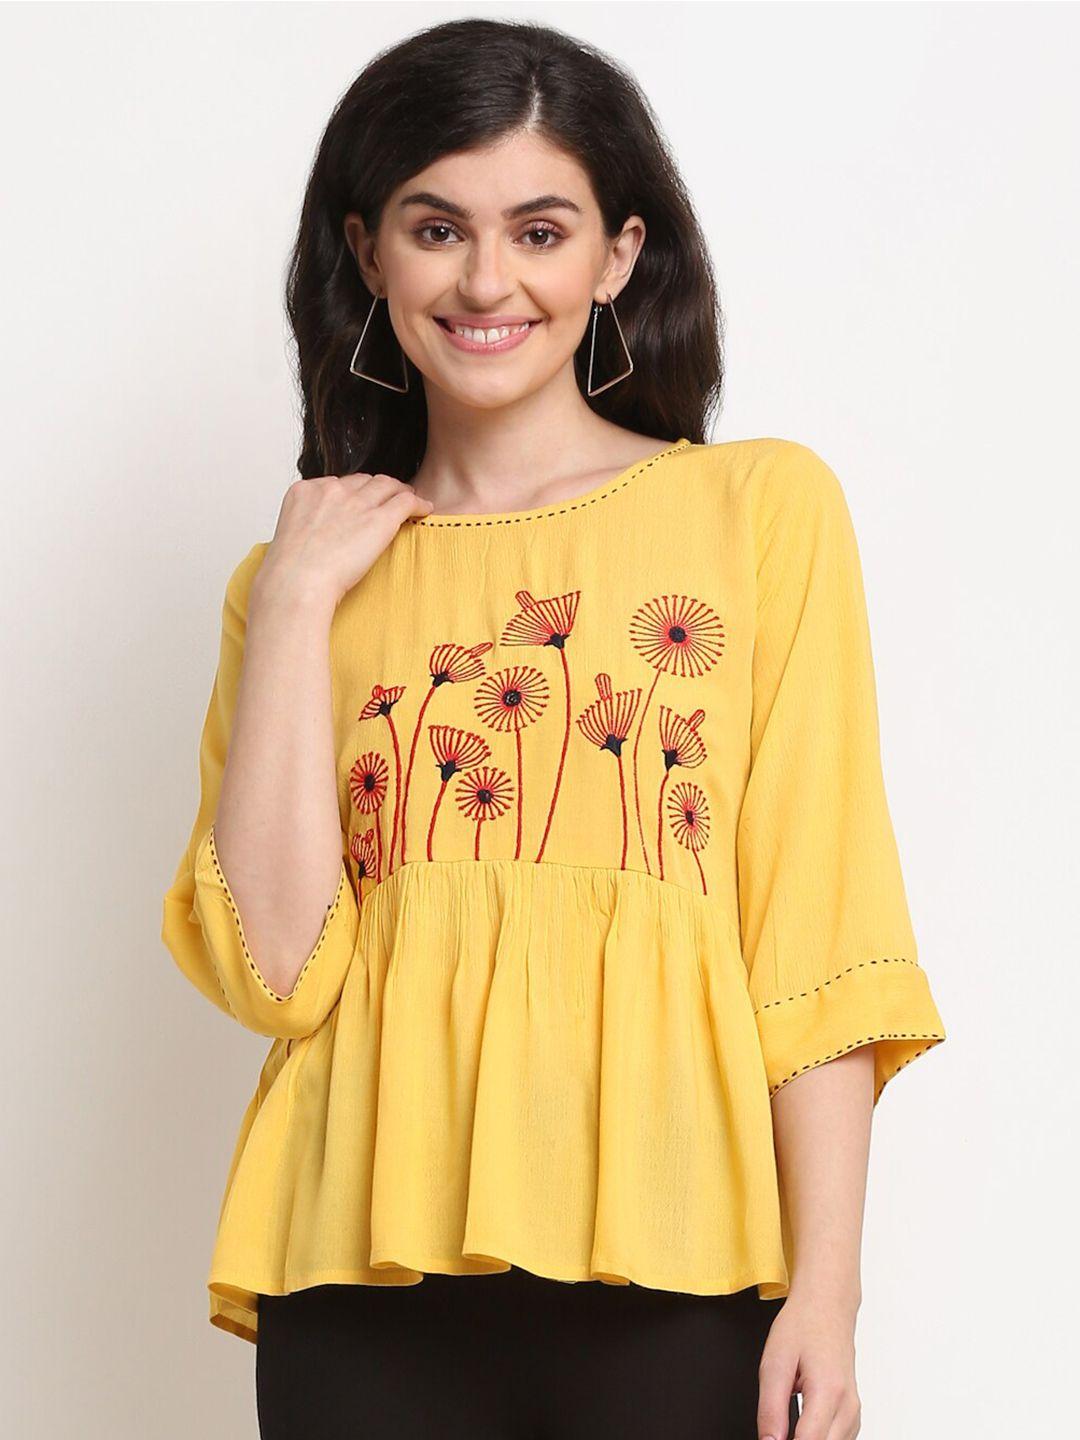 la-zoire-mustard-yellow-floral-embroidered-peplum-top